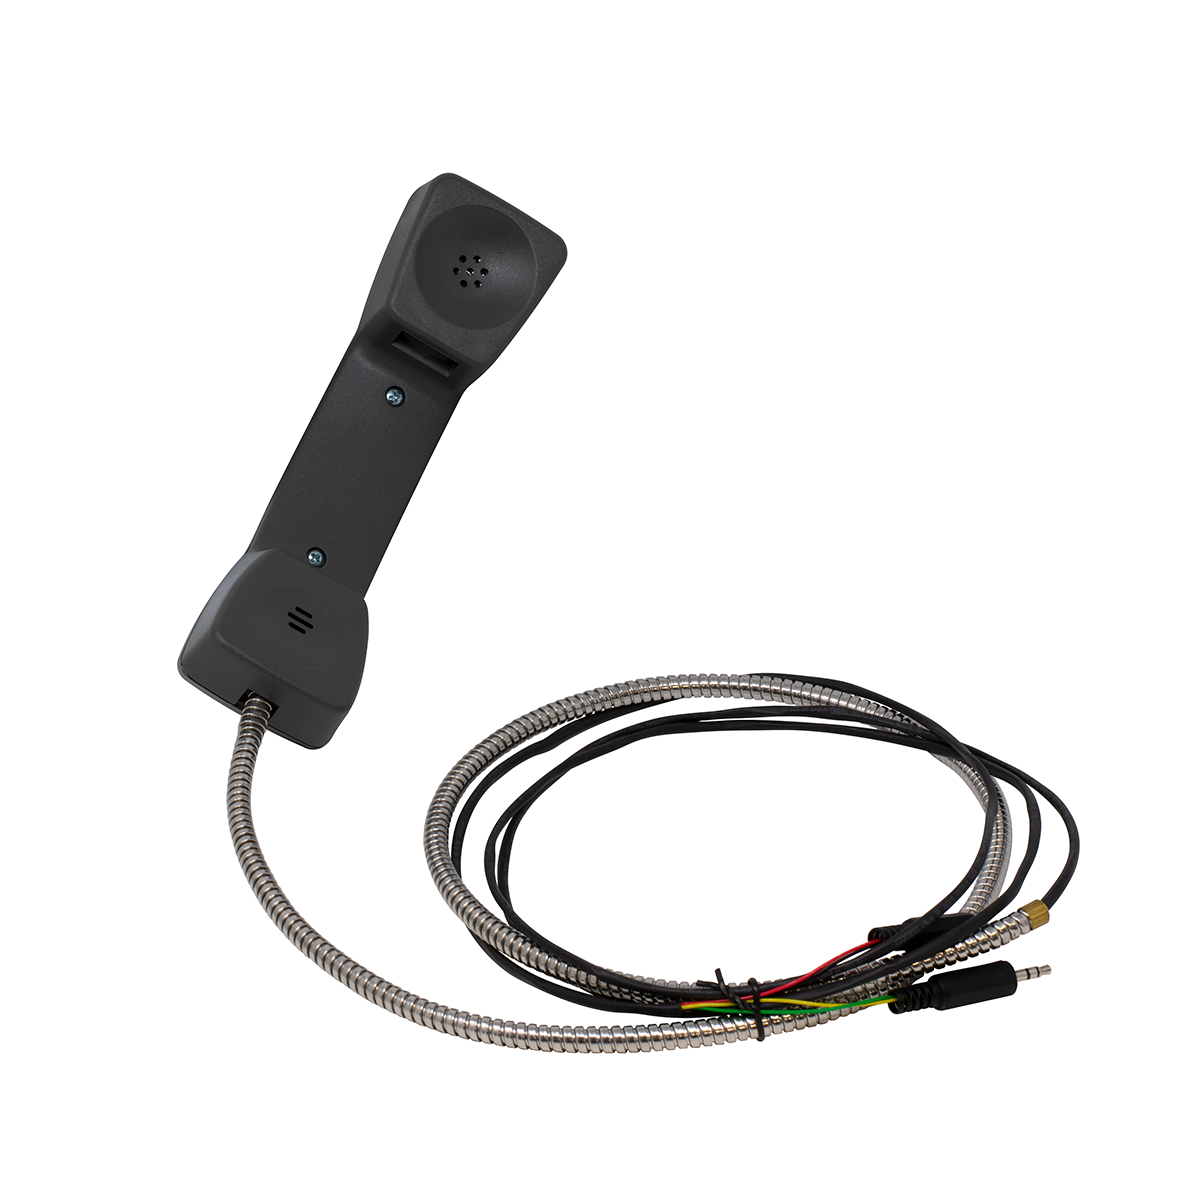 Charcoal Euro PC Handset with Armored Cord